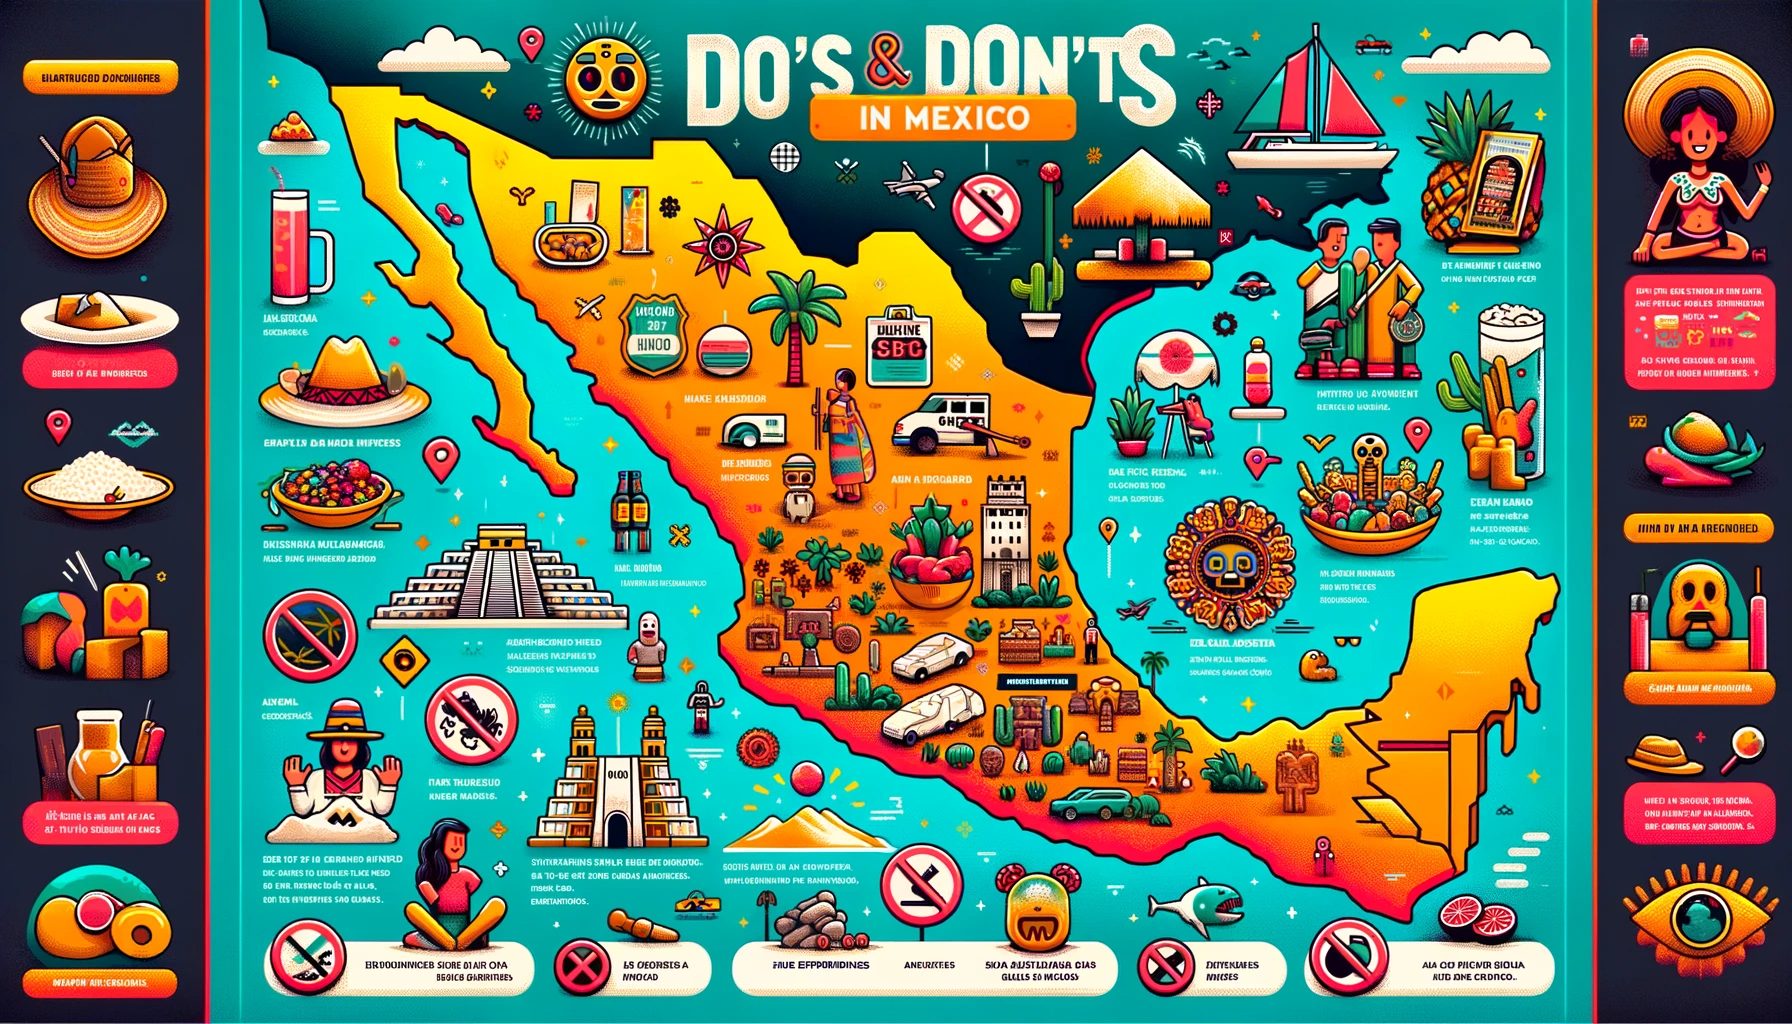 Colorful illustrated travel guide on dos and don'ts in Mexico.